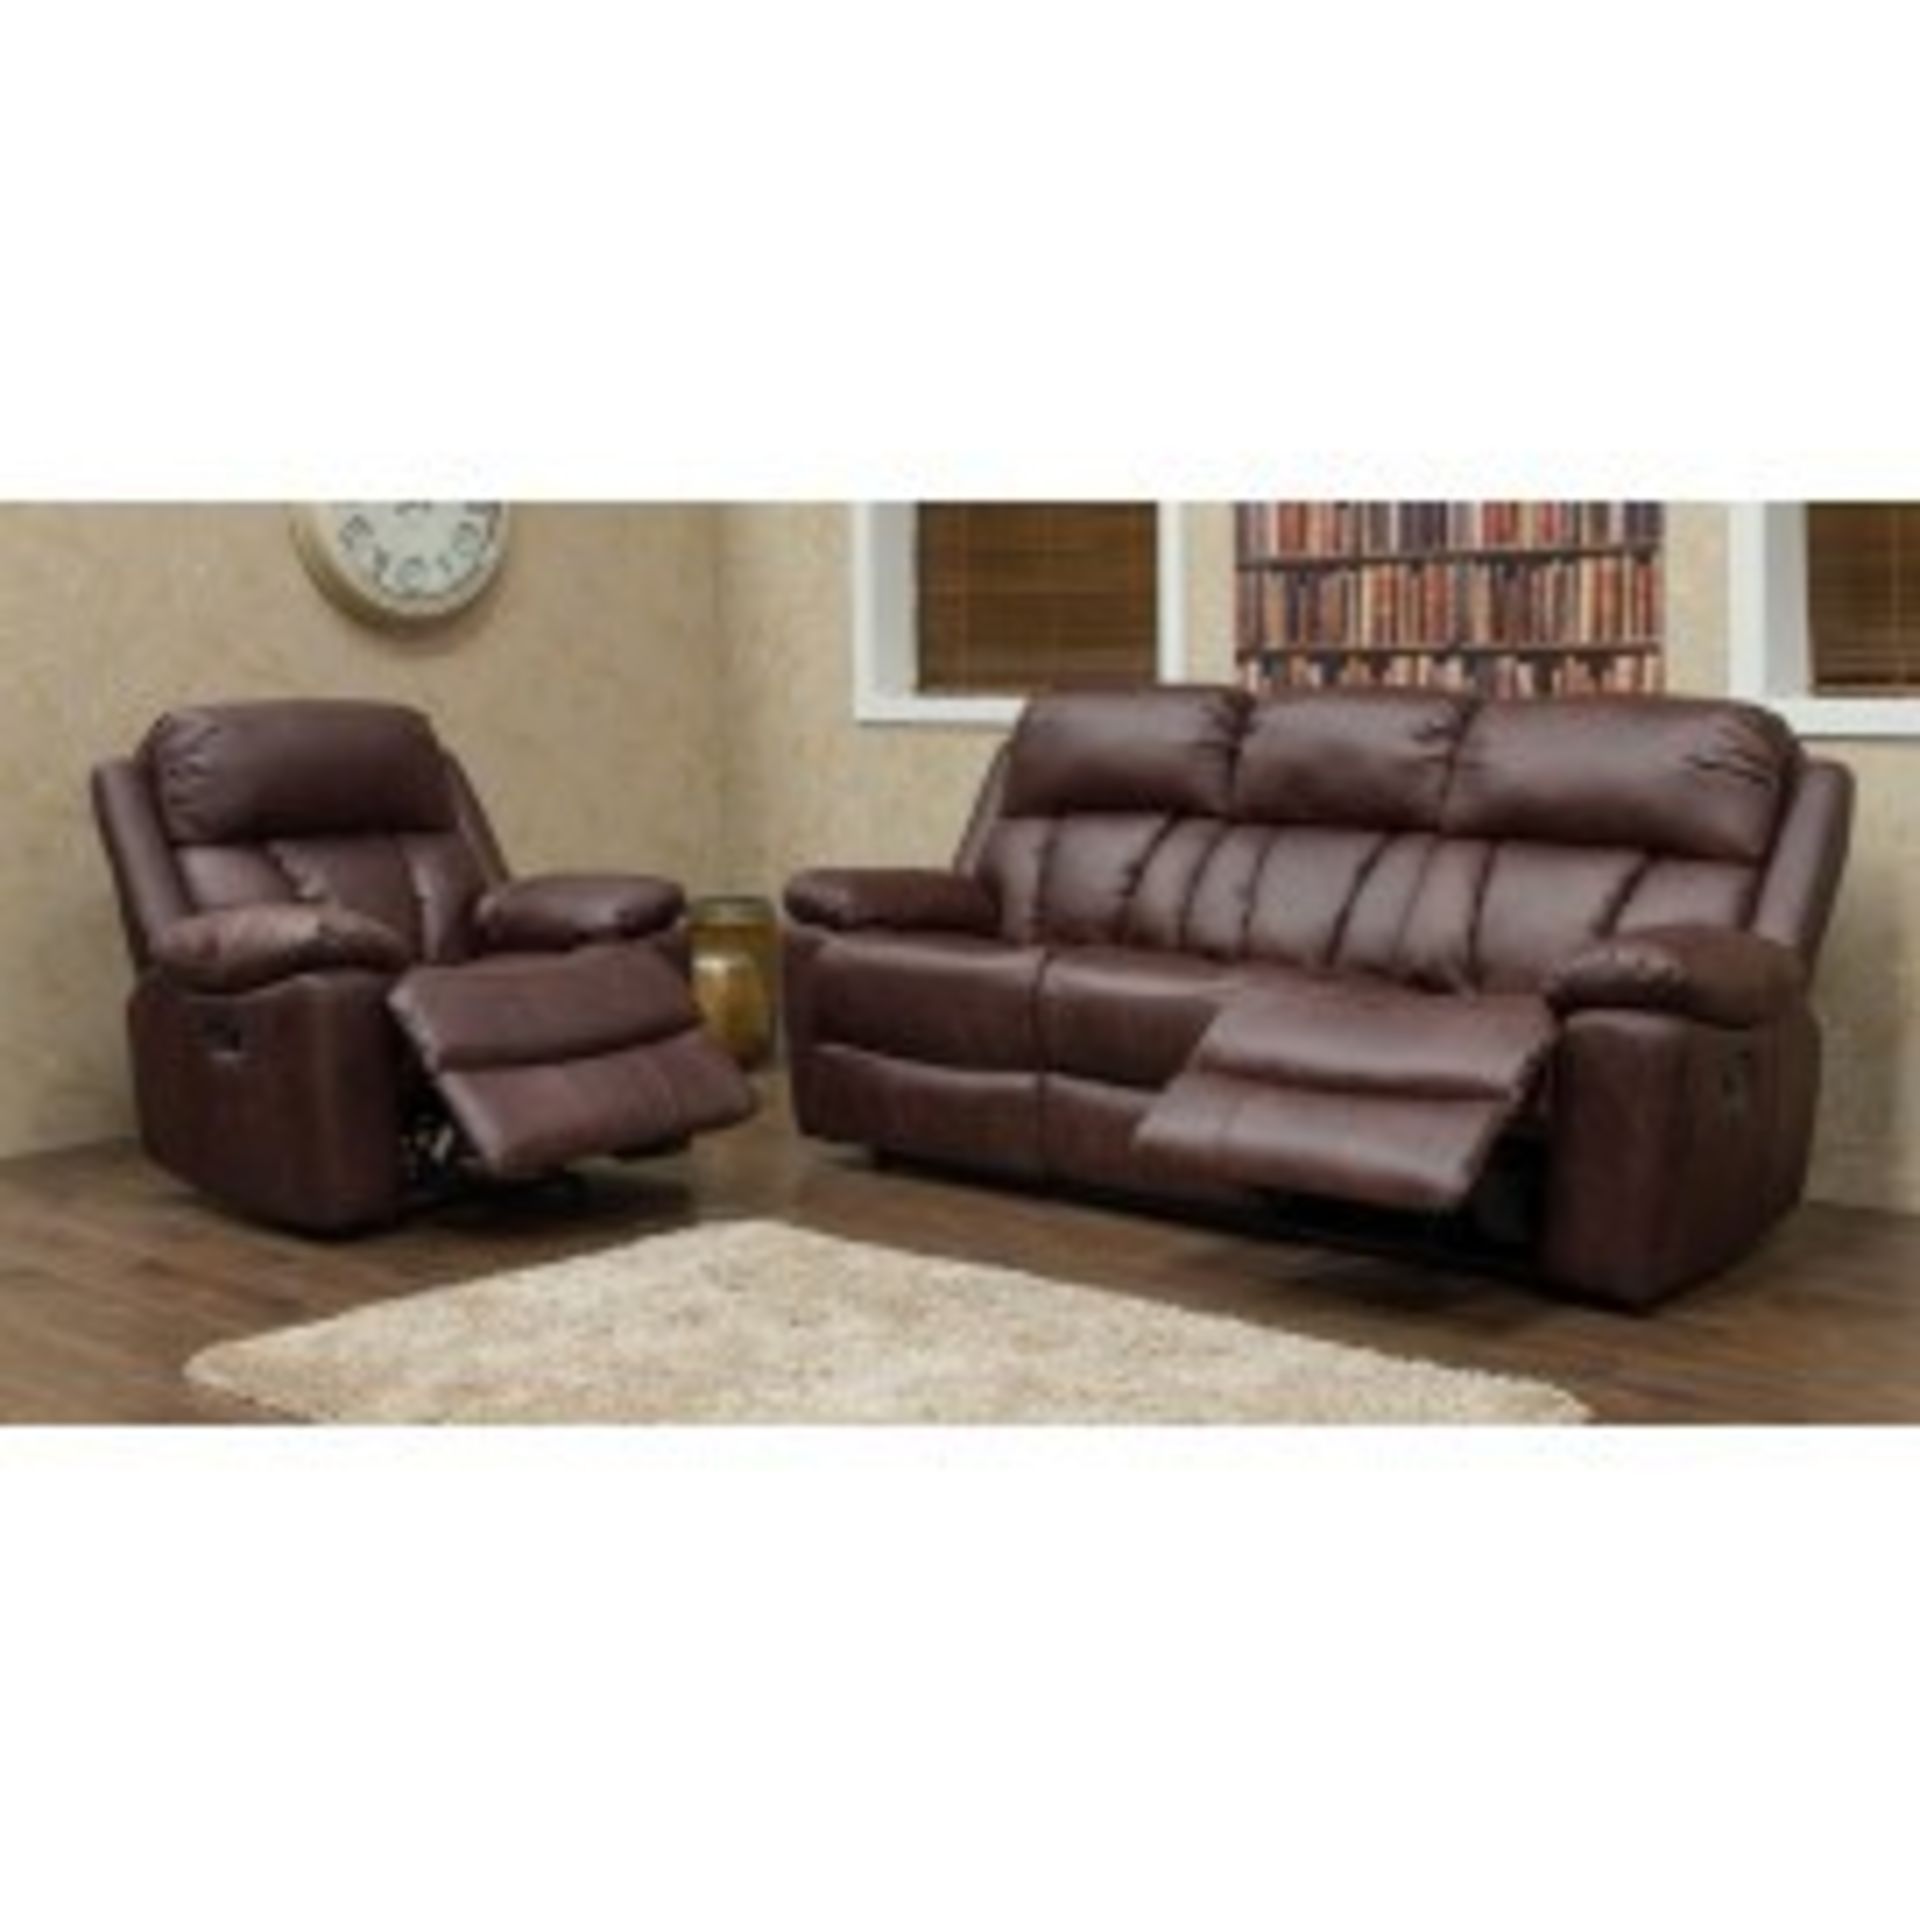 Brand New Boxed Benson 3 Seater Chestnut Leatheraire Reclining Sofa Plus 2 Matching Arm Chairs - Image 3 of 3